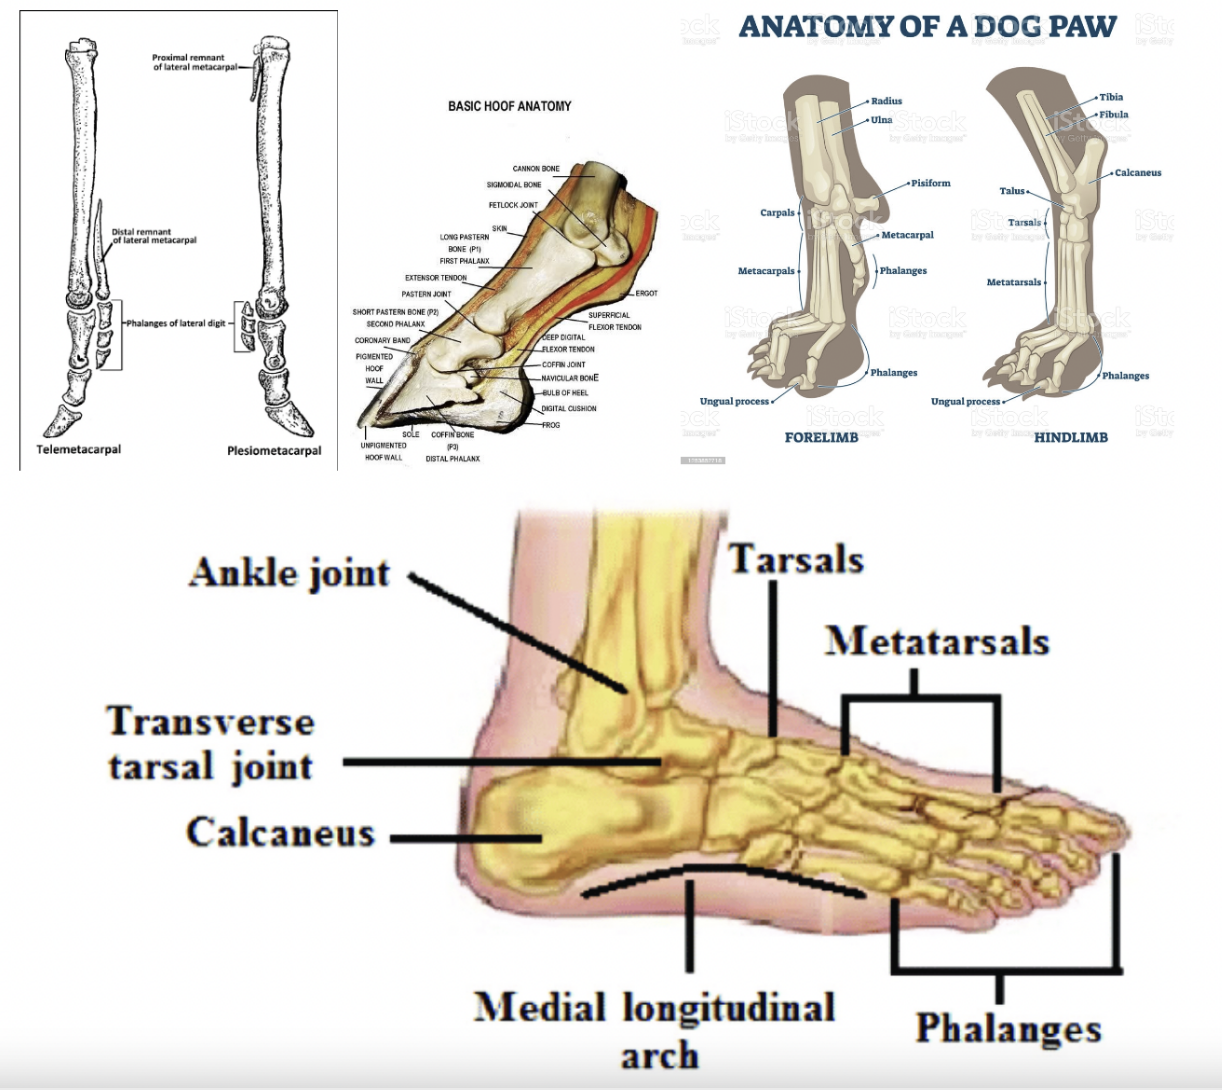 a picture comparing various mammal feet diagrams to the human foot. the details are unimportant but clearly they are qualitatively different. human feet are much longer and less springy